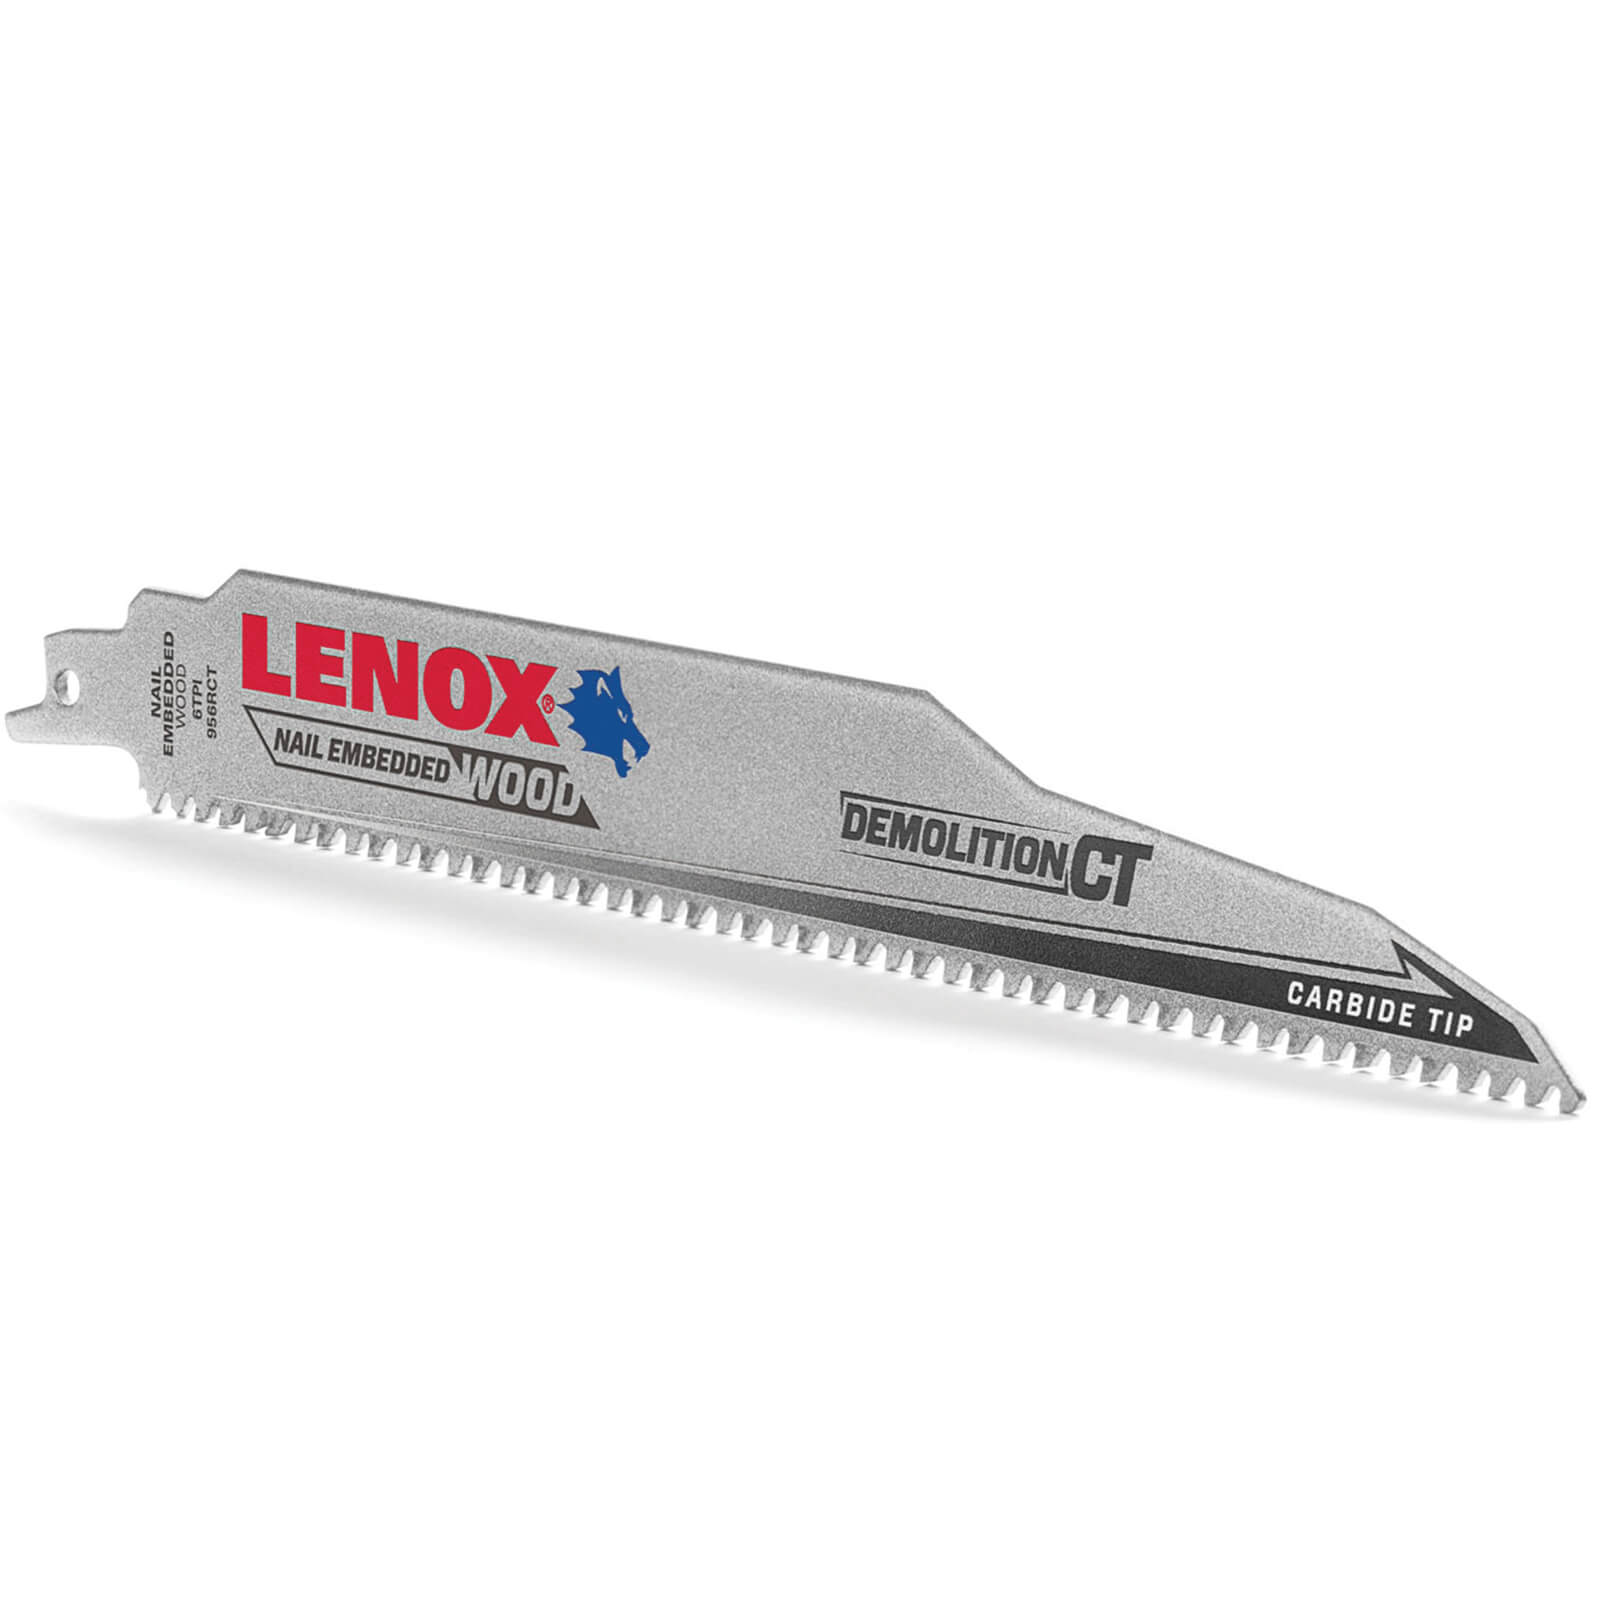 Image of Lenox CT Carbide Tipped Demolition Reciprocating Sabre Saw Blades 305mm Pack of 1